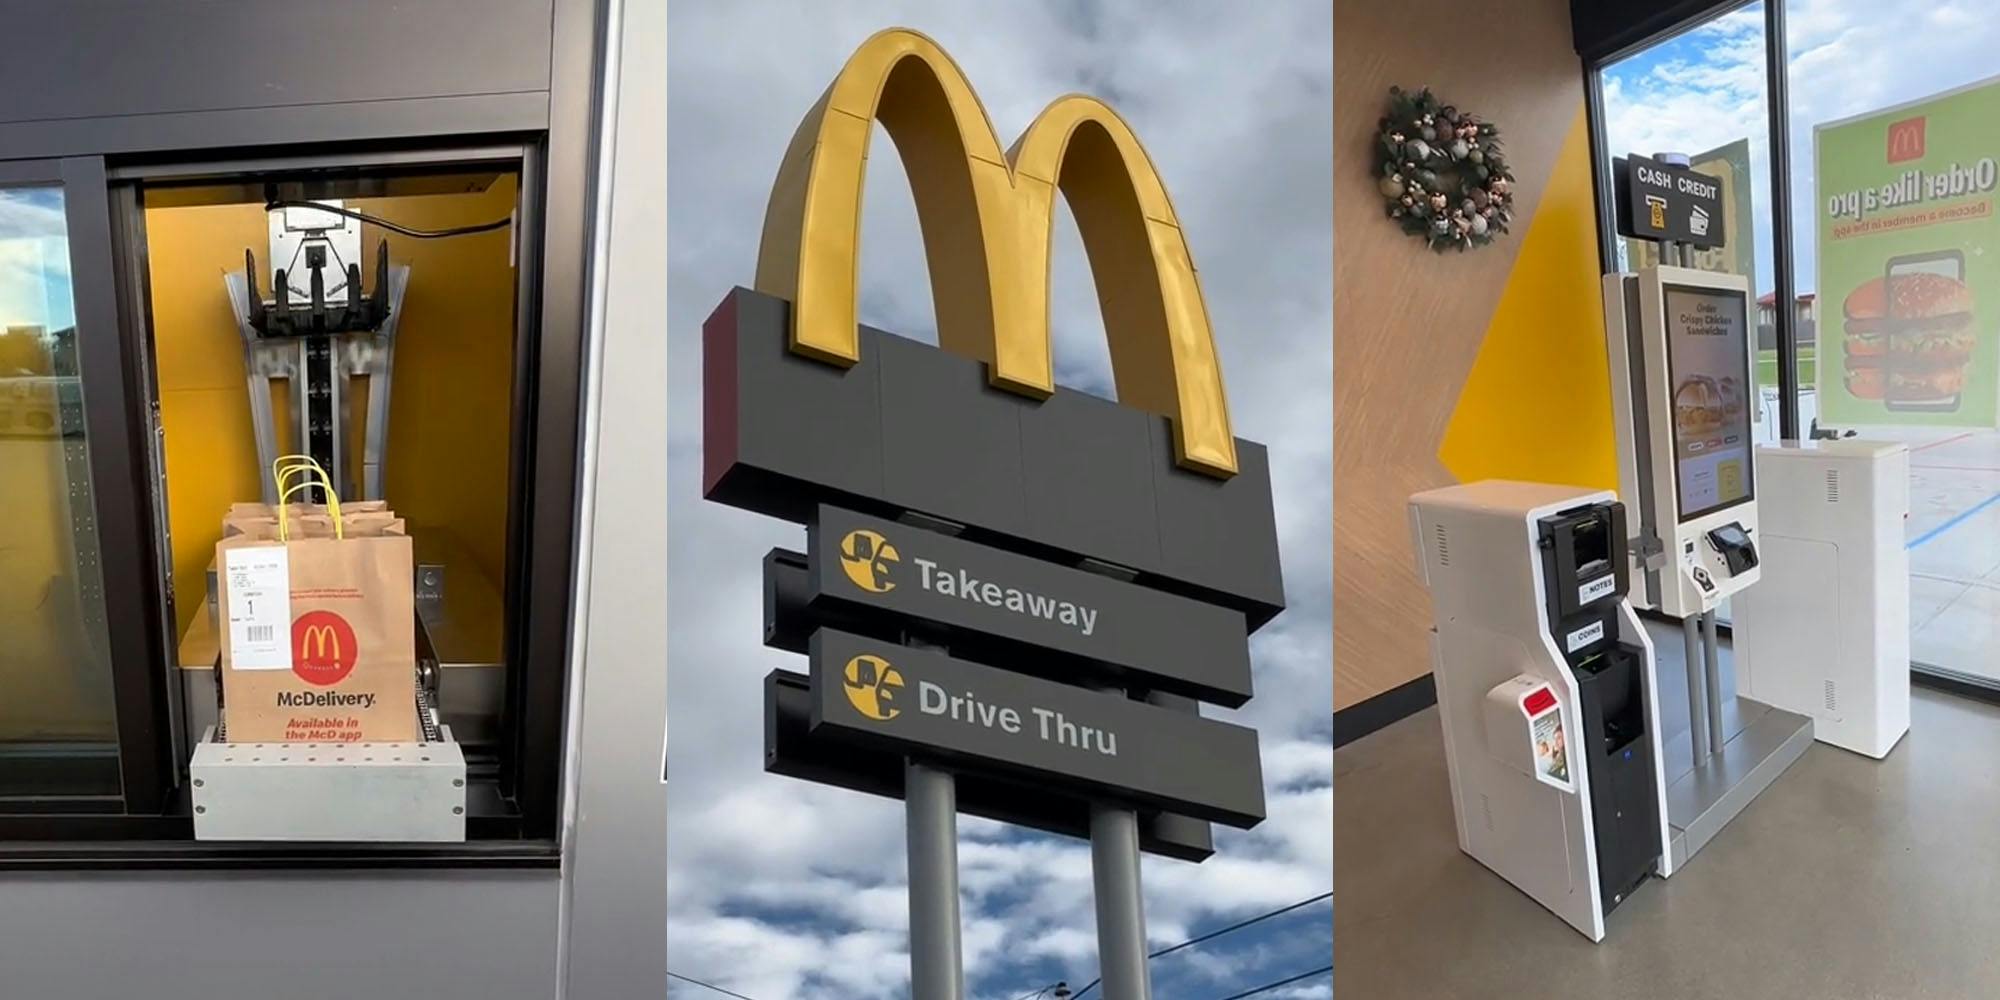 automated McDonald's drive thru with bags ready to be taken (l) McDonald's sign outside "Takeaway Drive Thru" (c) McDonald's interior with self pay (r)